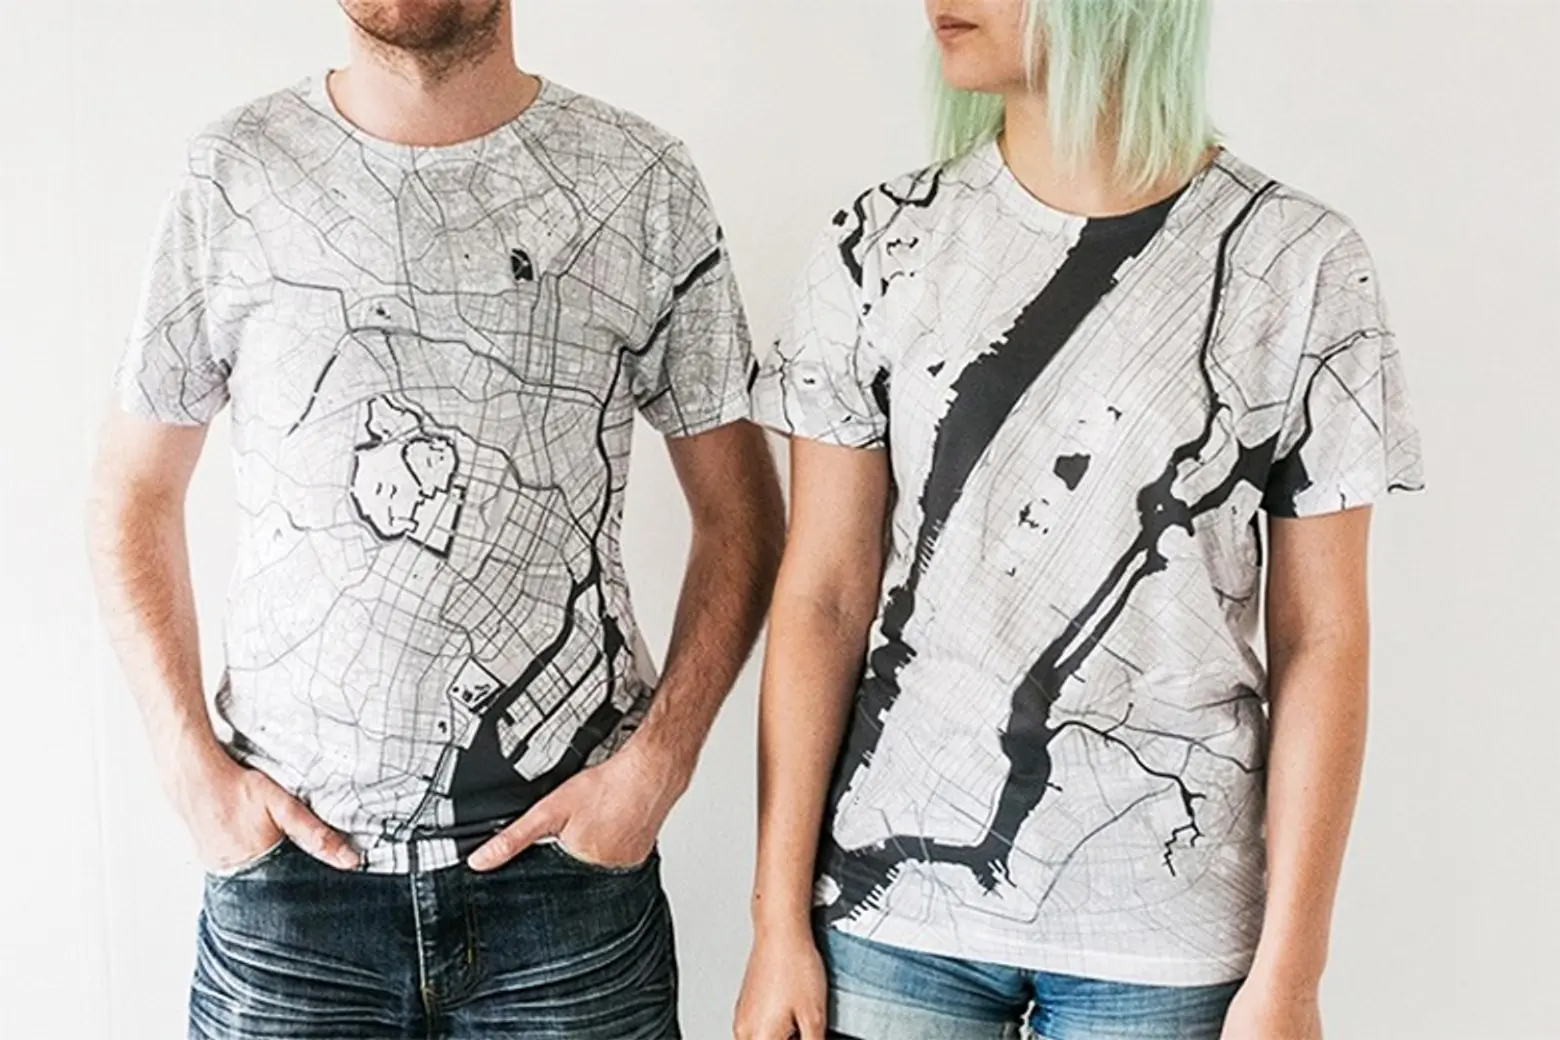 Citee t-shirts are covered with city maps from 230 different locations